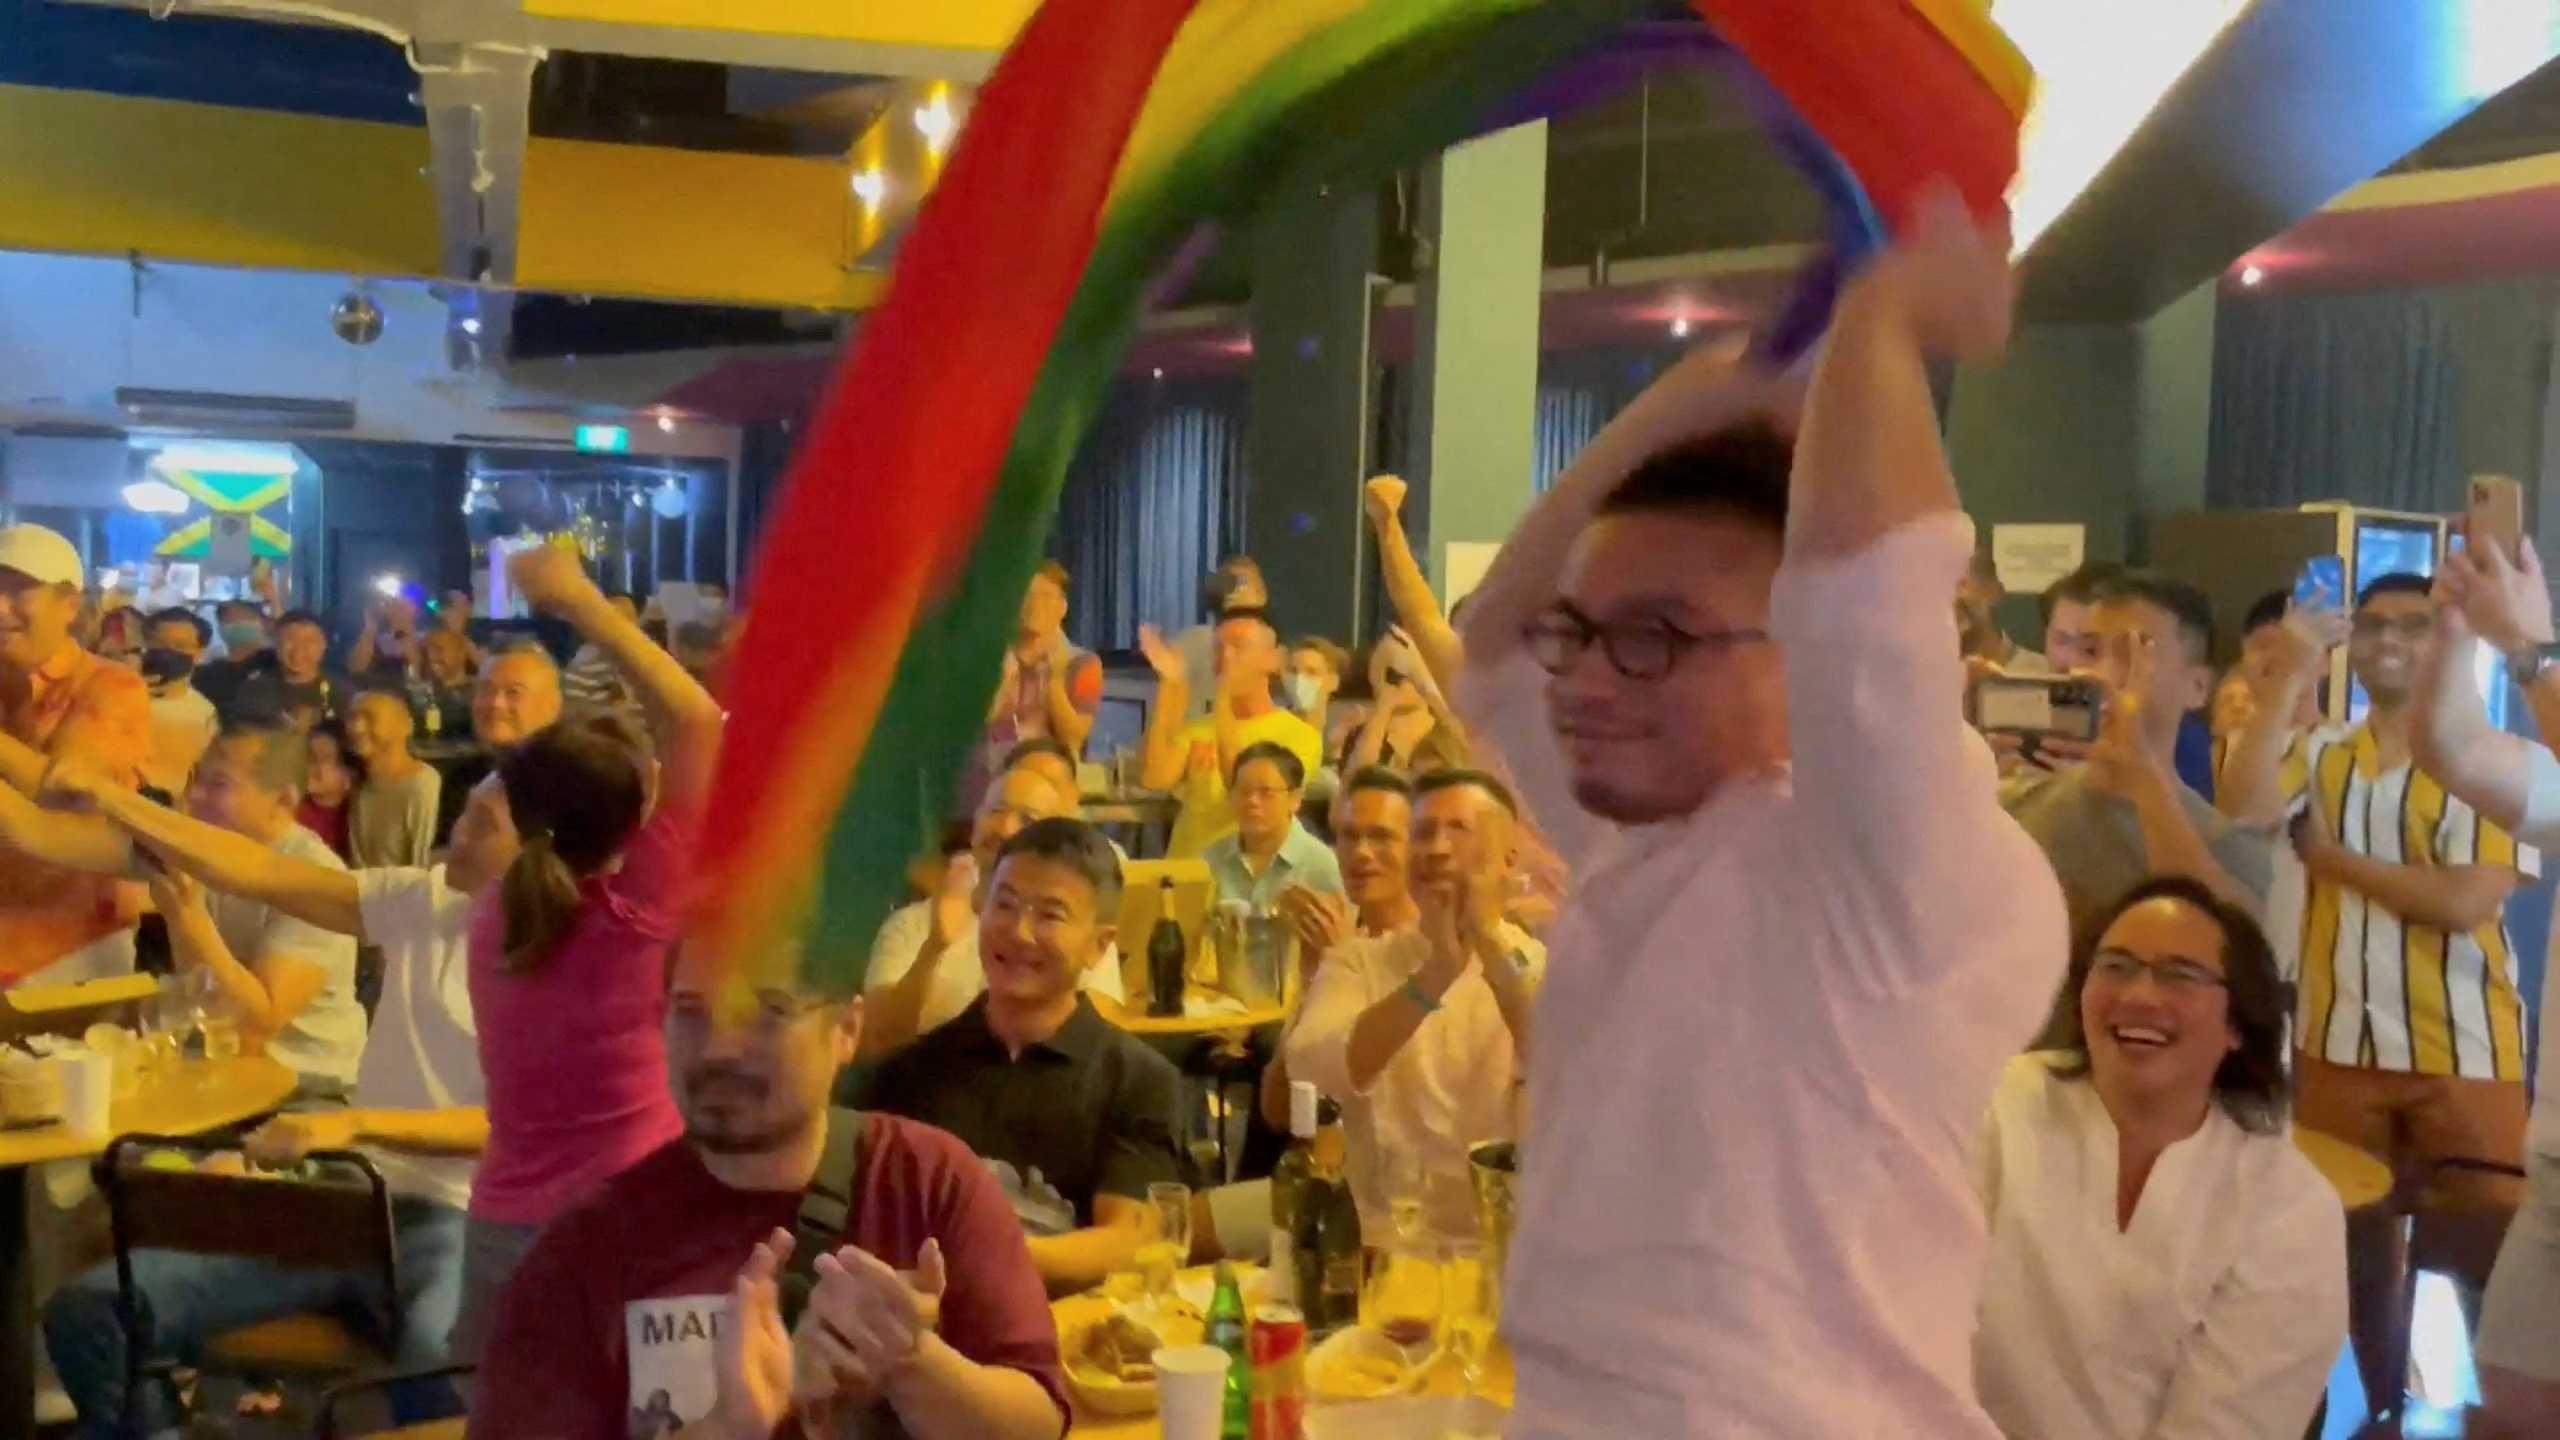 A man waves a rainbow flag after Singapore's Prime Minister Lee Hsien Loong announces that Singapore will decriminalise gay sex, in Singapore, Aug 21, this screen grab obtained from a social media video. Photo: Reuters